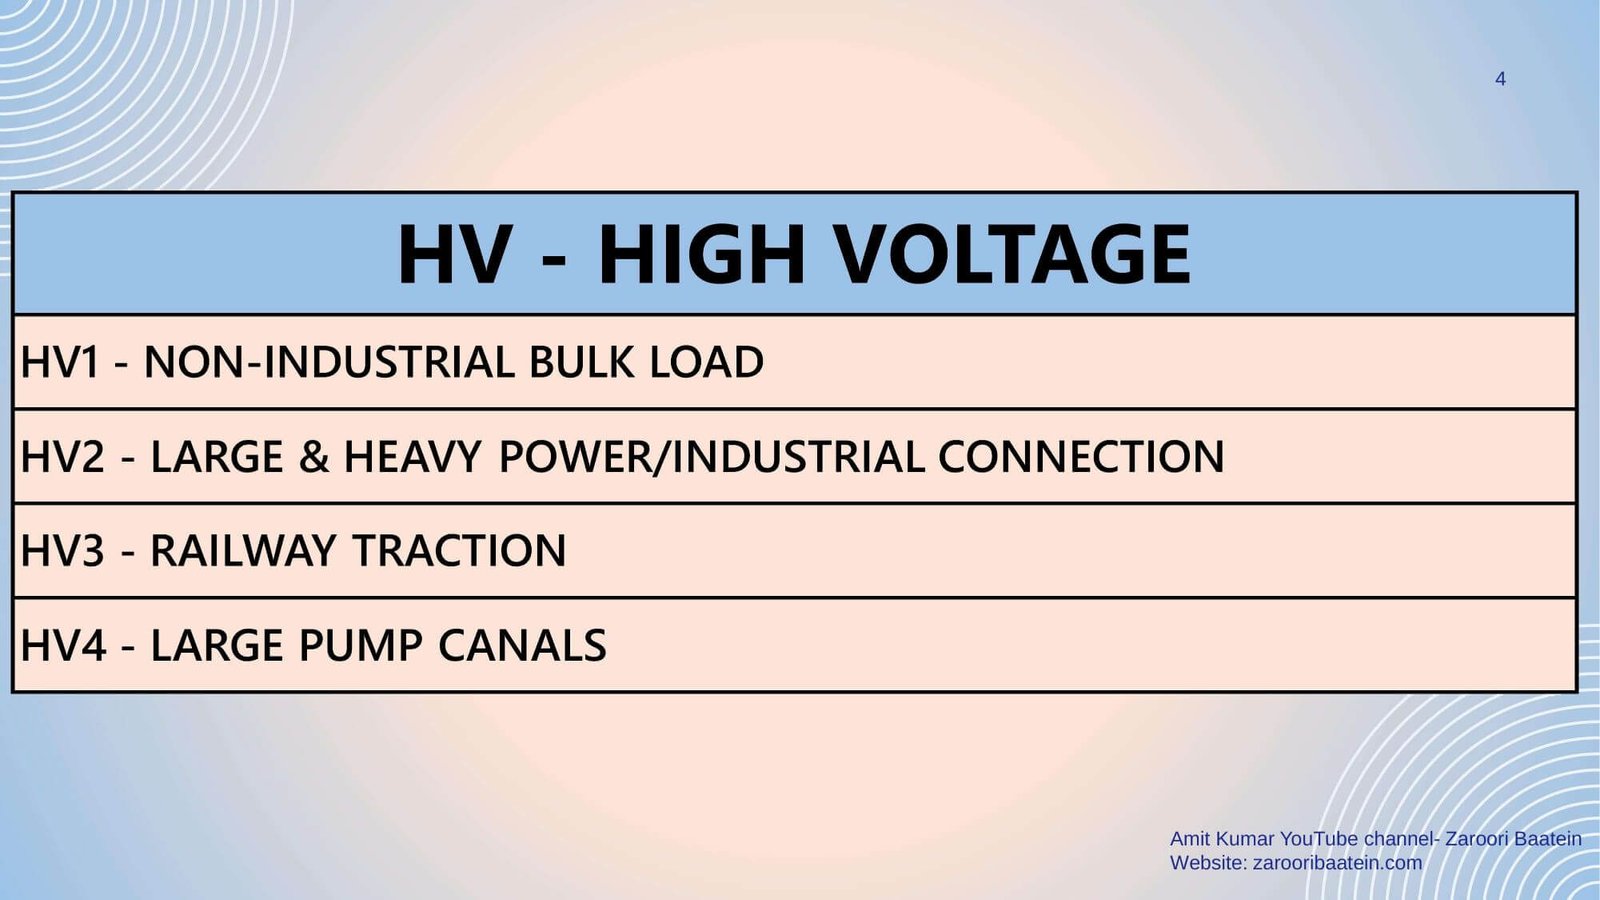 Subcategories of HV in UPPCL